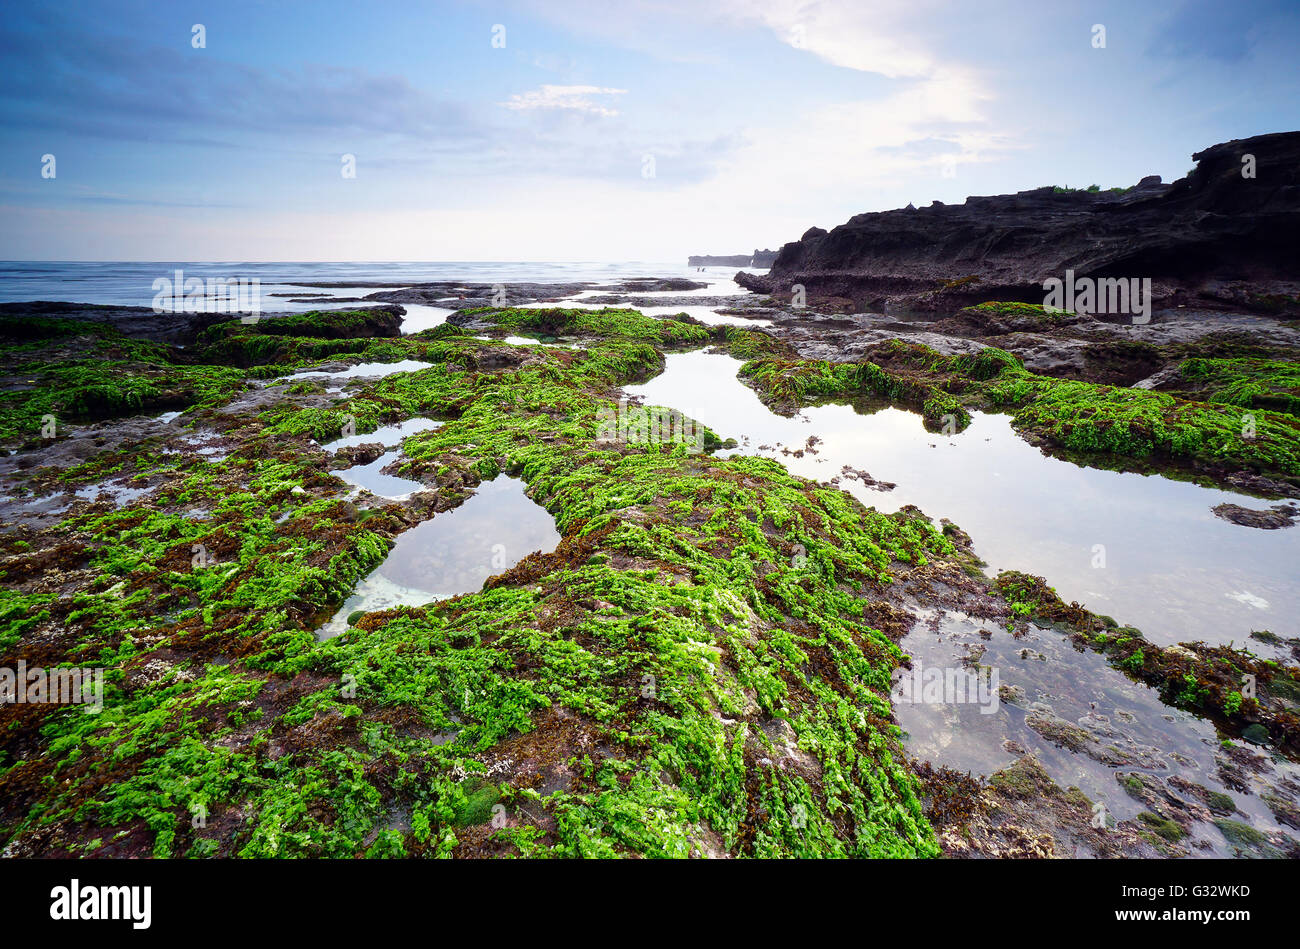 Moss covered rocks on Mengening beach at low tide, Bali, Indonesia Stock Photo